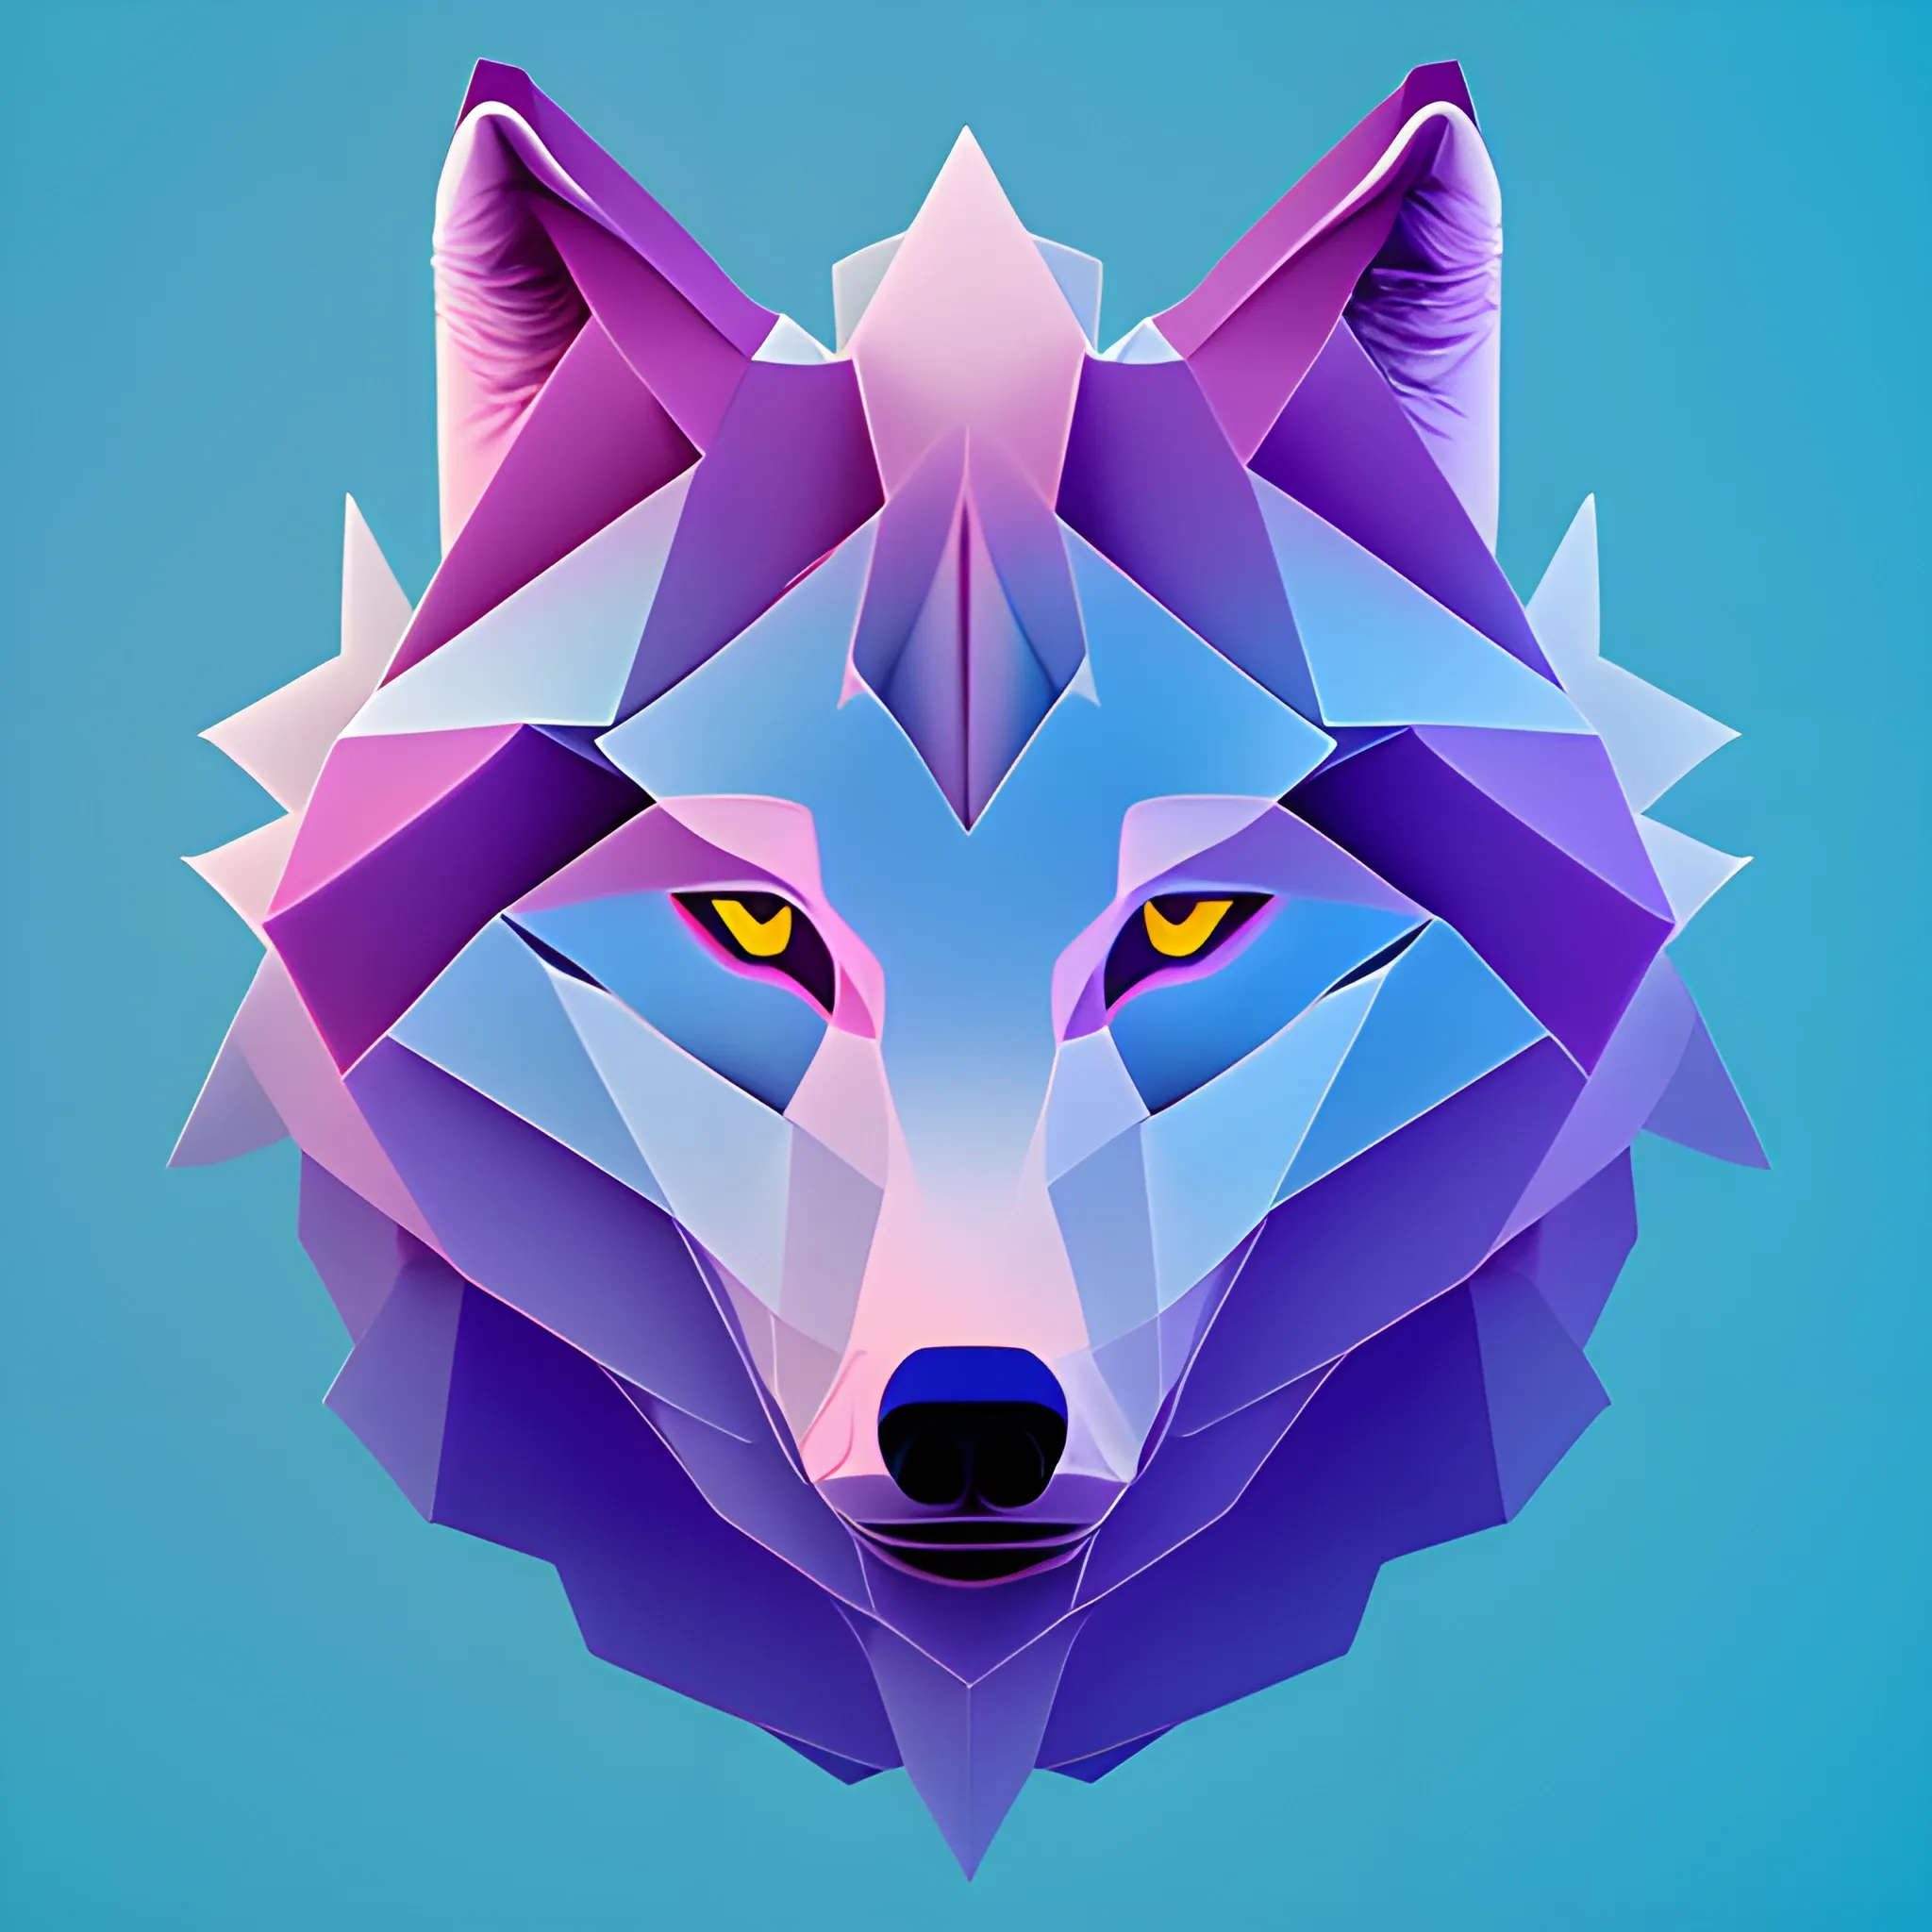 a wolf, minimalistic colorful organic forms, energy, assembled, layered, depth, alive vibrant, 3D, abstract, on a light blue background 